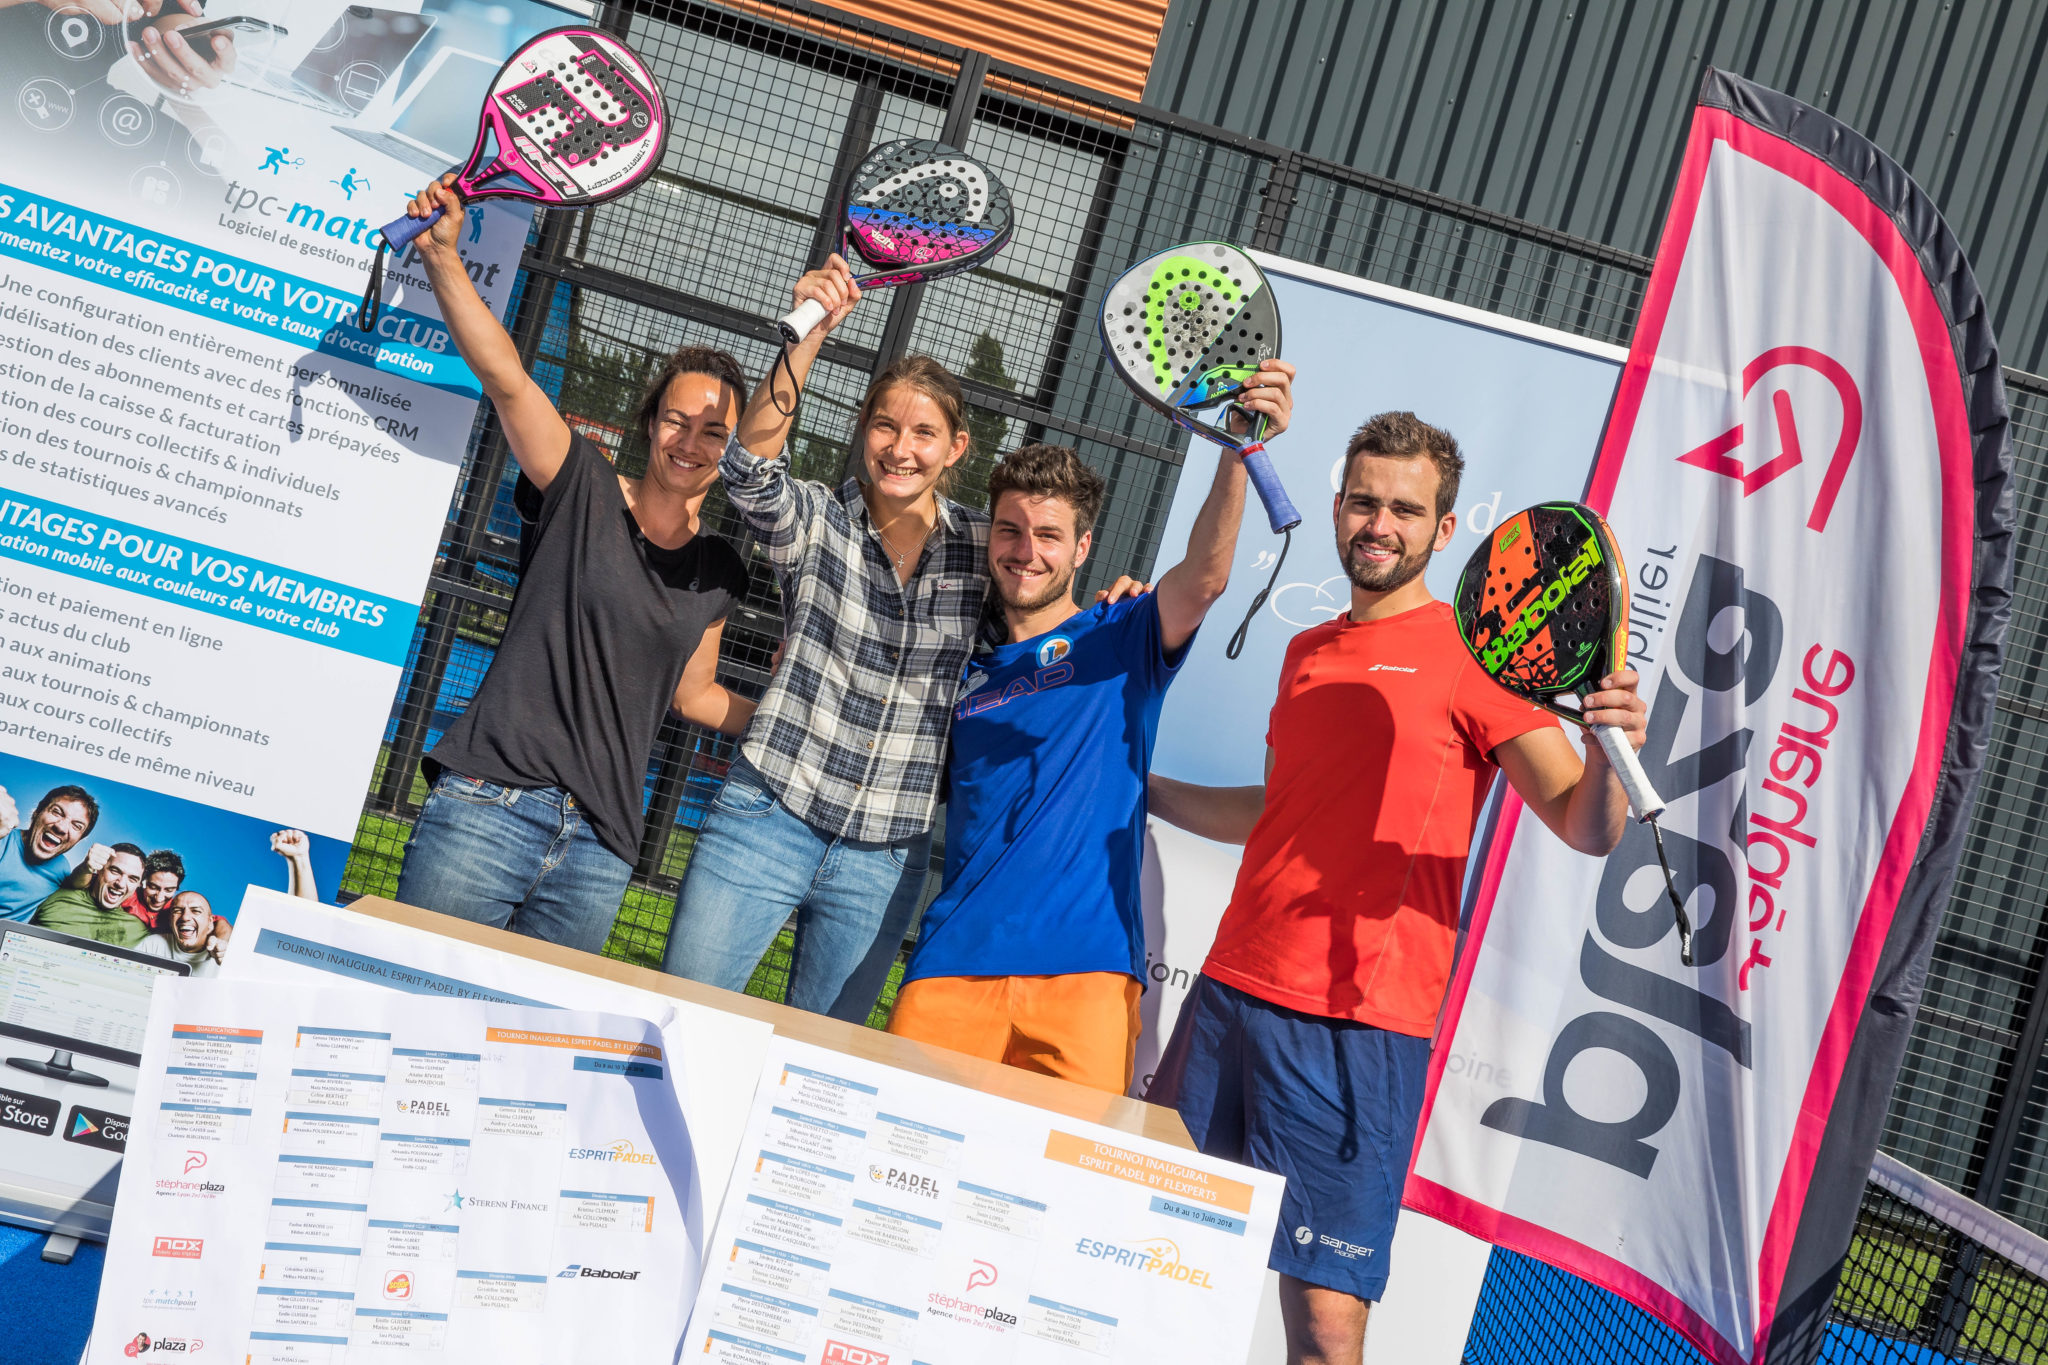 Collombon / Pujals and Blanqué / Bergeron win at the Open Esprit Padel by Flexpert